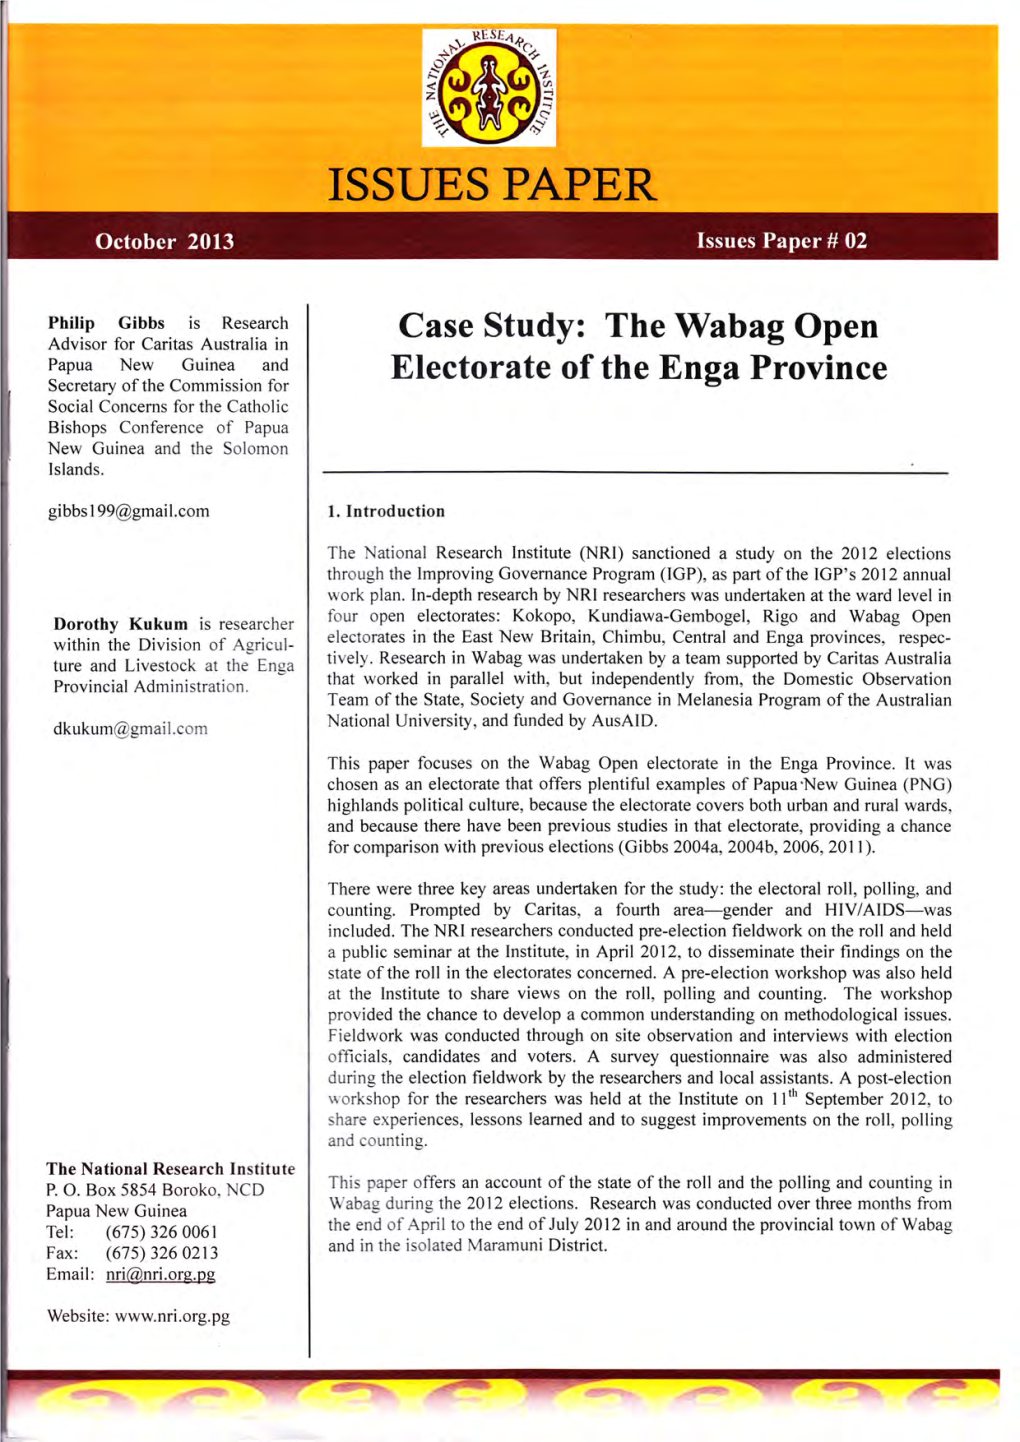 Case Study: the Wabag Open Electorate of the Enga Province